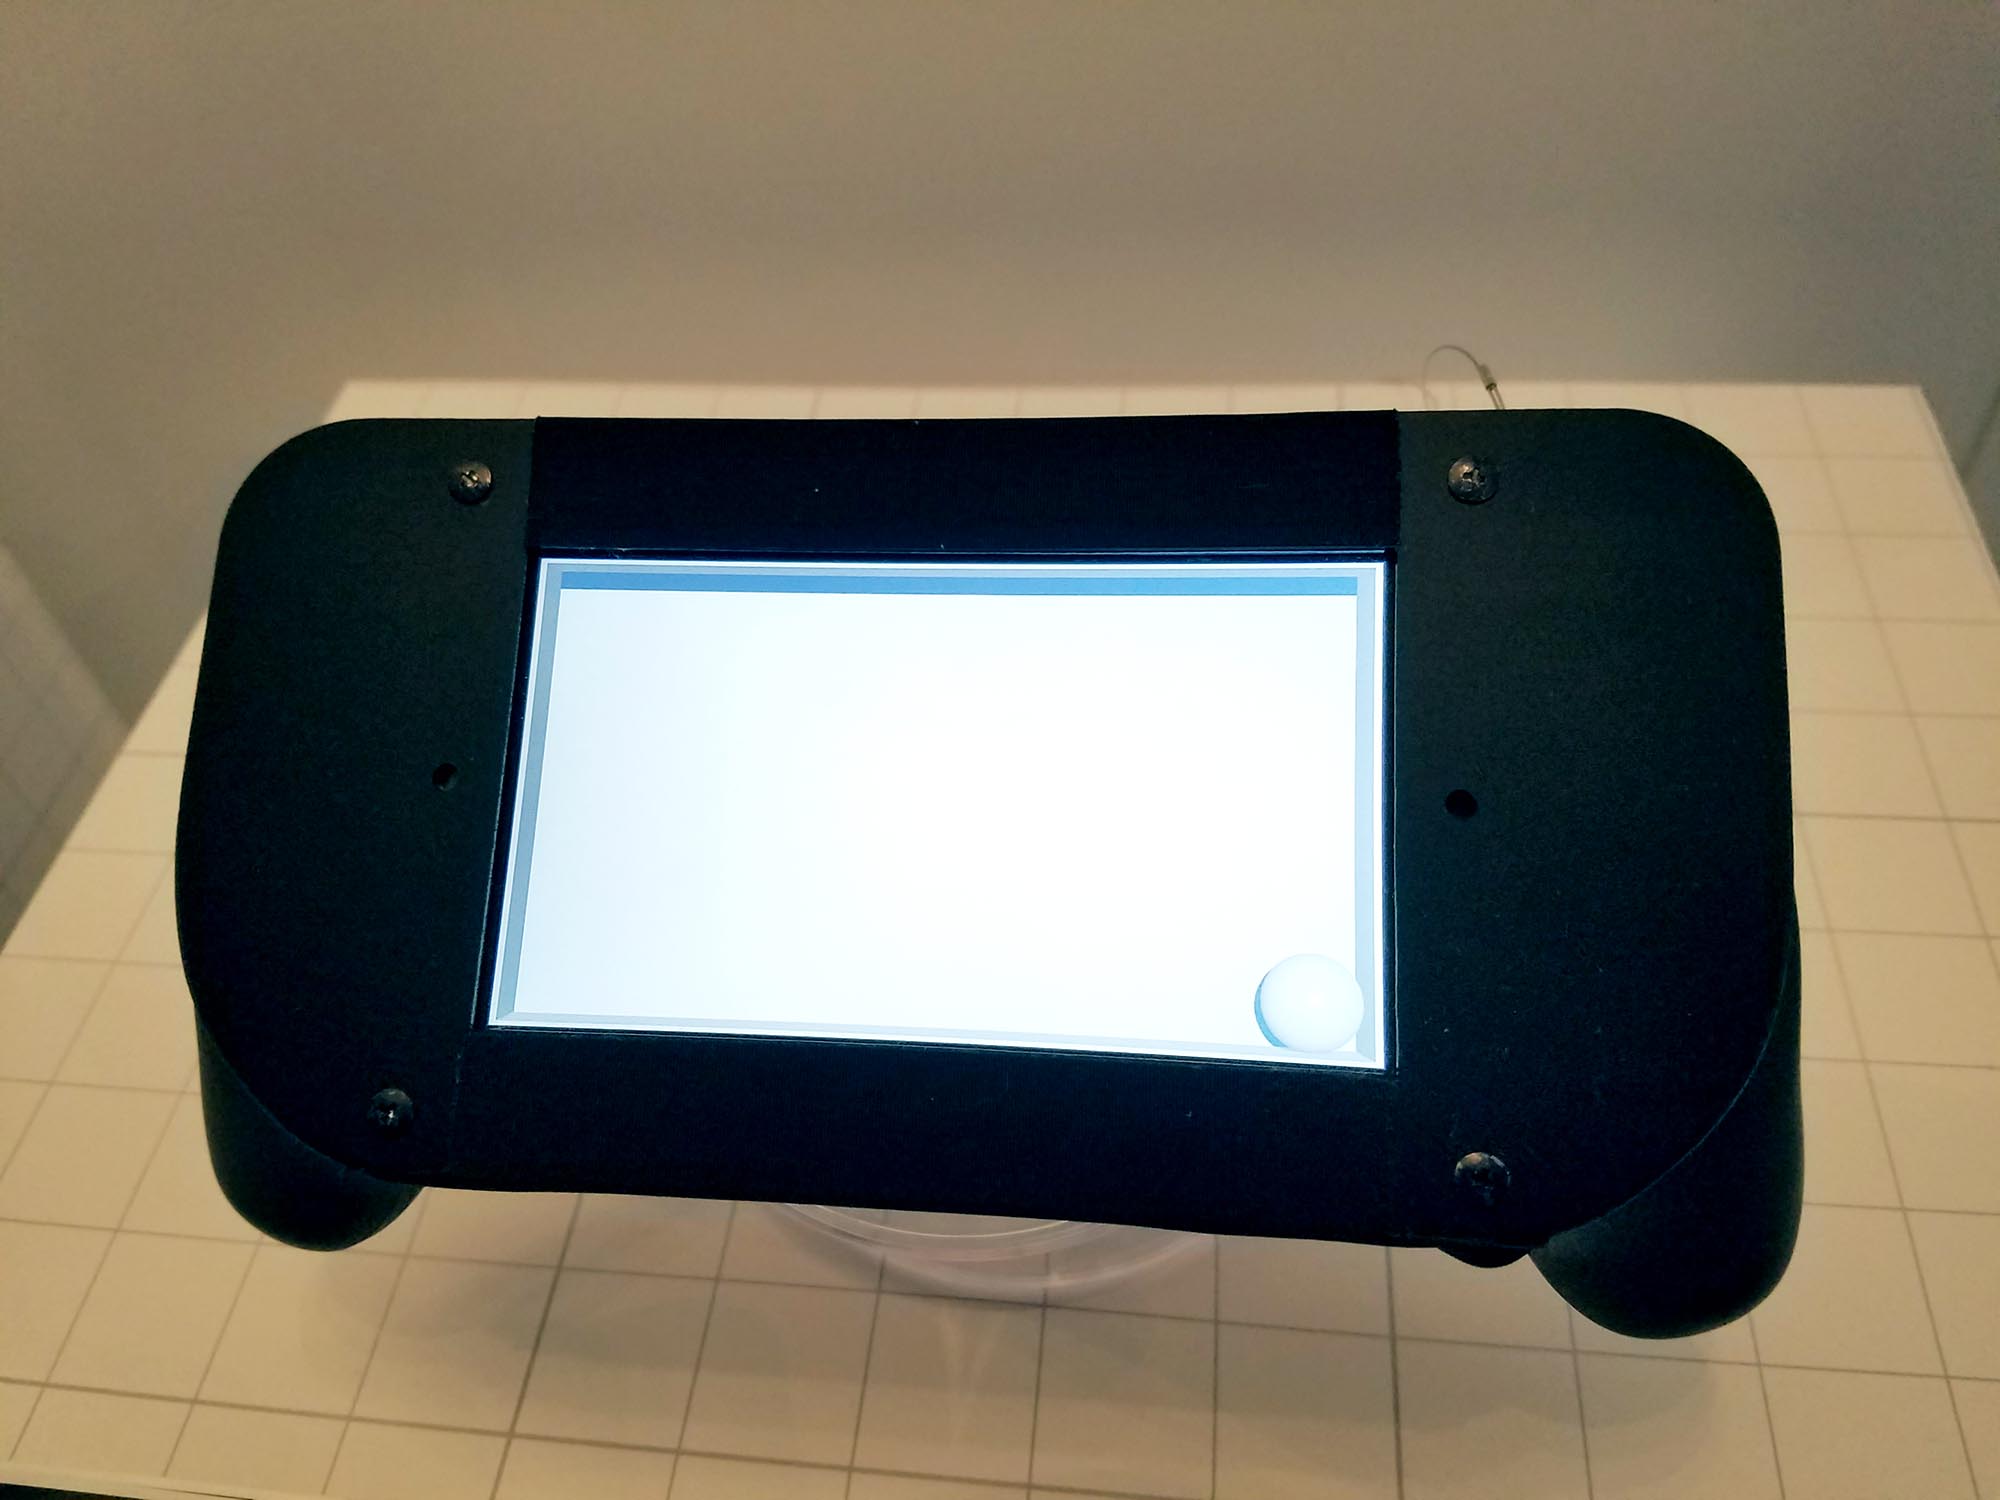 Sony demonstrates its haptic feedback technology on this handheld game console at South by Southwest Interactive on March 11, 2016.